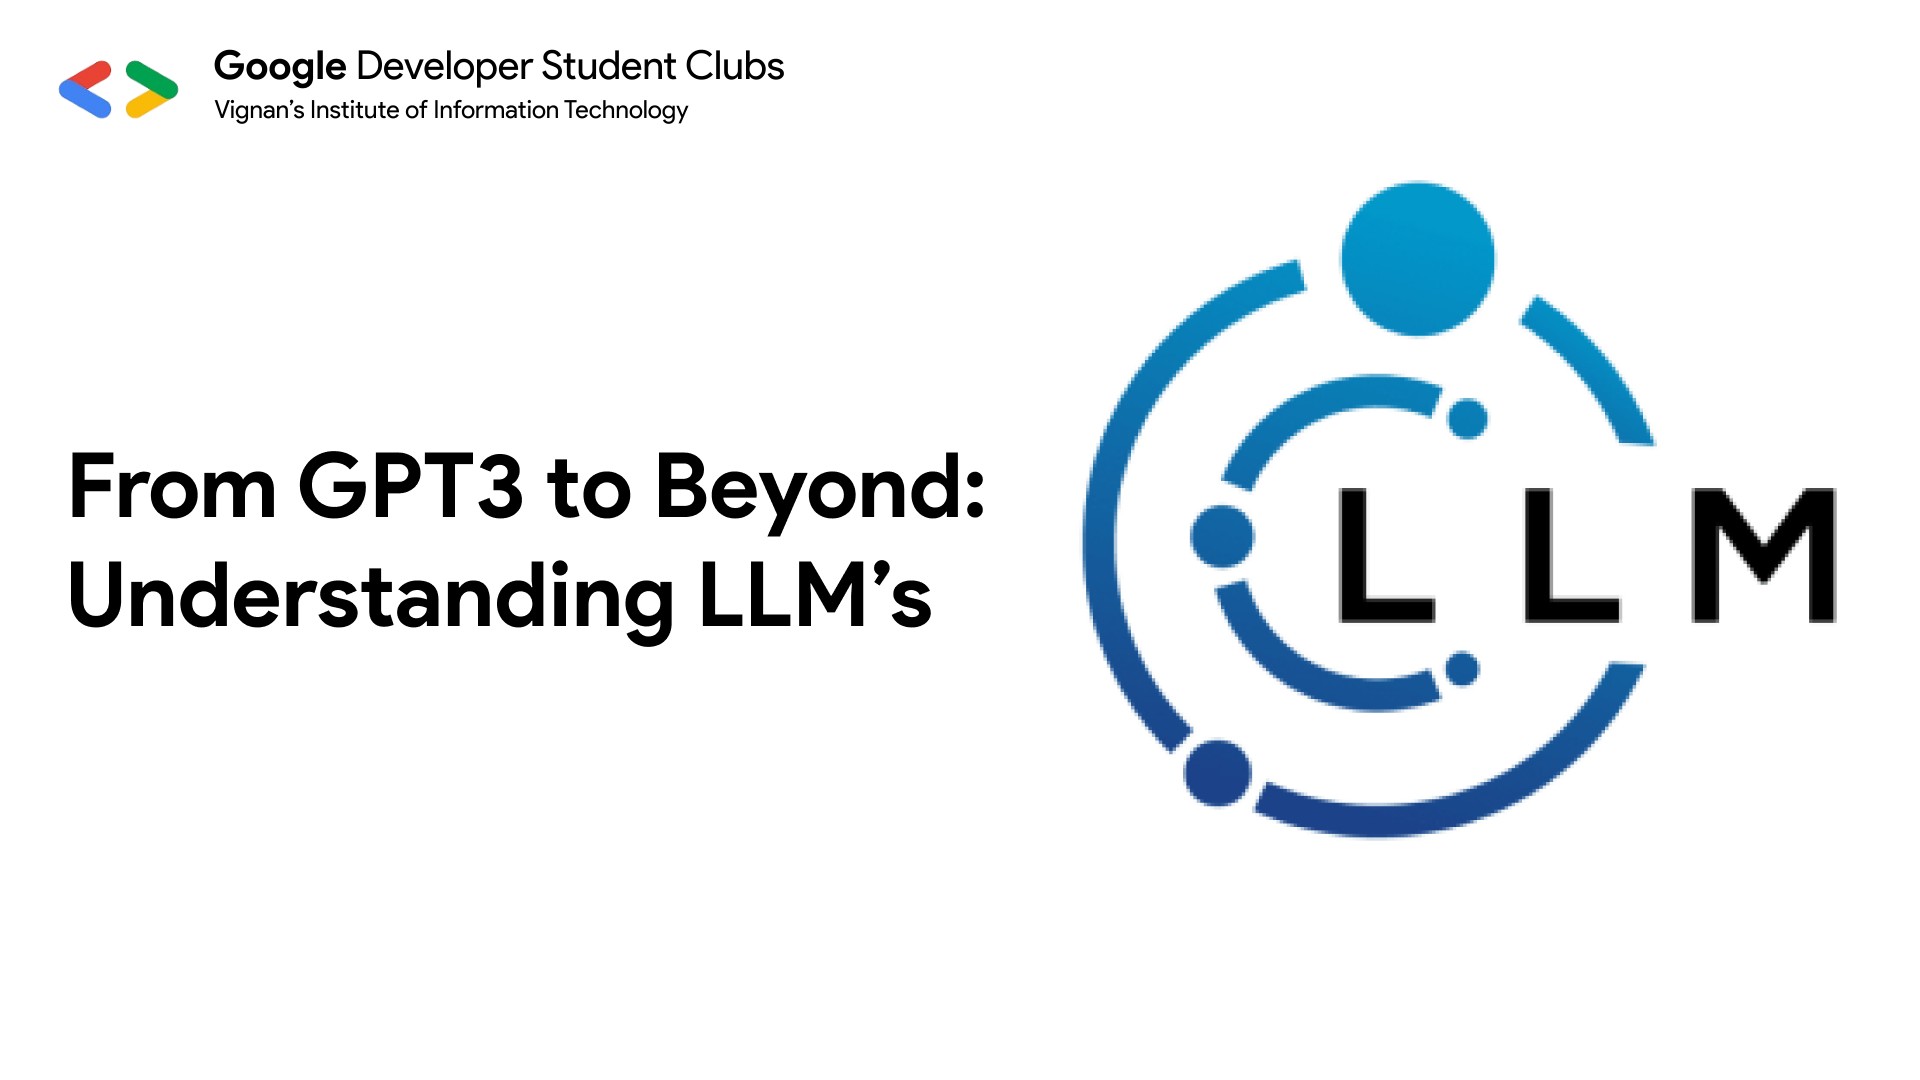 From GPT3 to Beyond: Understanding LLMs